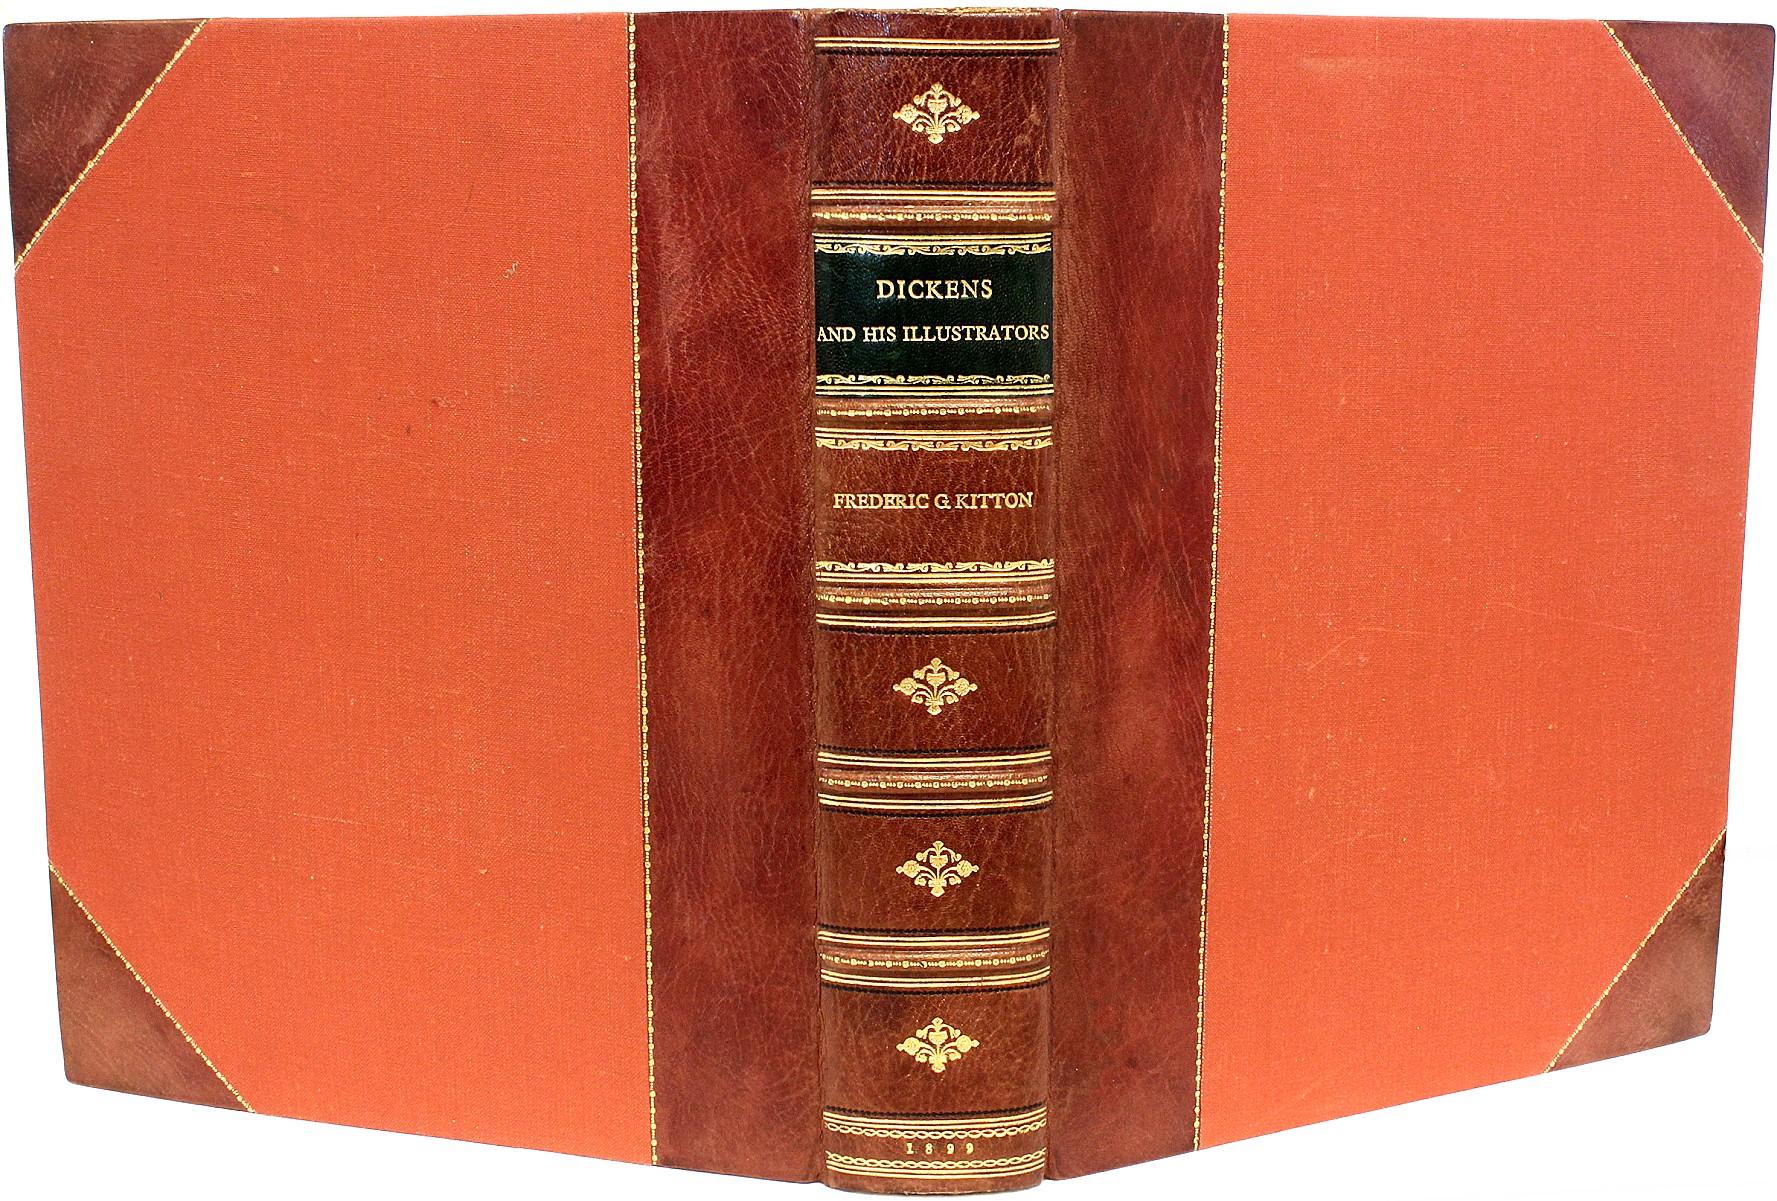 Author: Kitton, Frederic G.

Title: Dickens and His Illustrators.

Publisher: London: George Redway, 1899.

Description: Second edition. 1 vol., small folio, 11-3/8